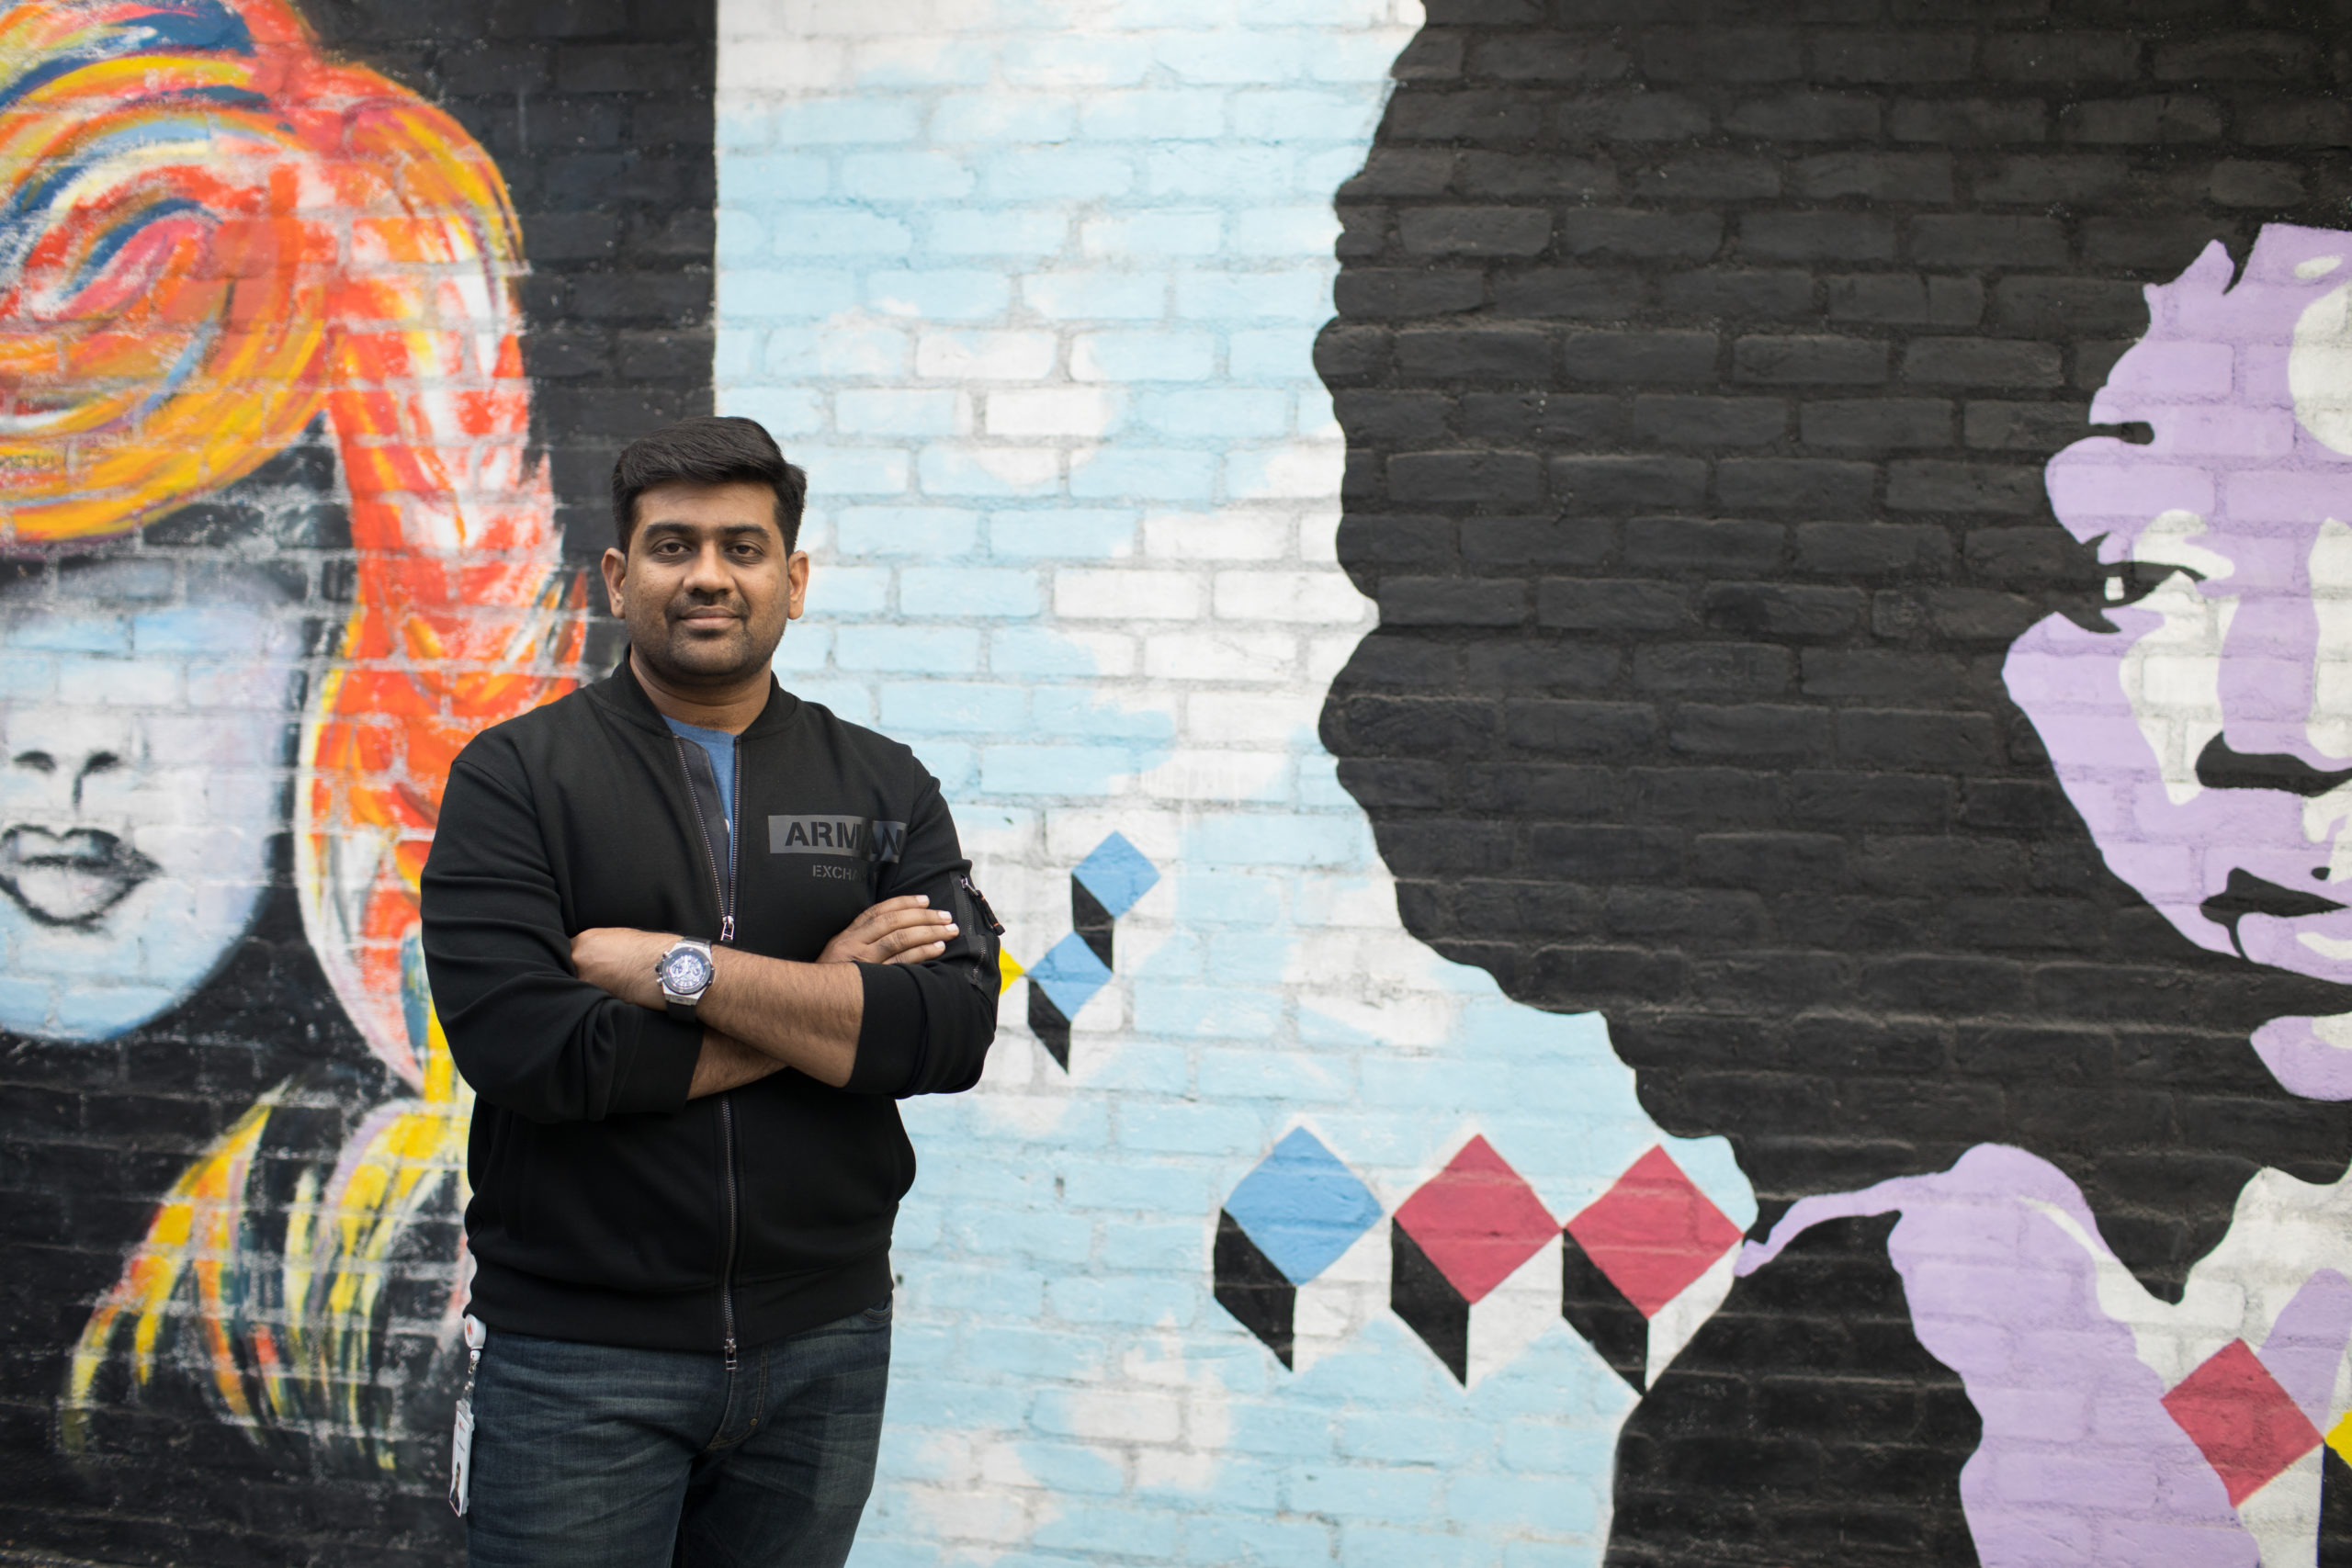 Amar Nagaram standing in front of a wall with a mural